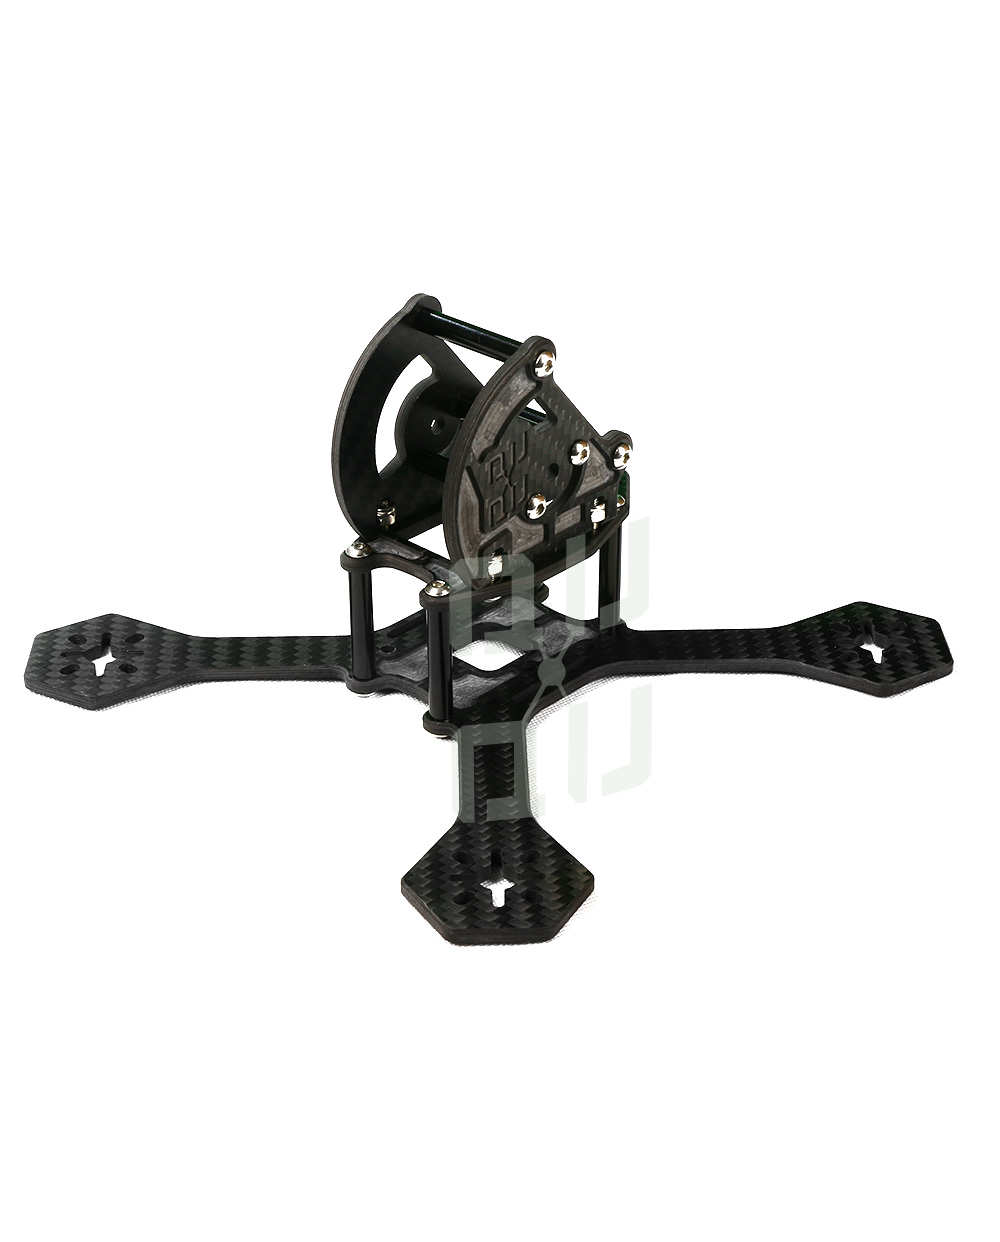 QQ166 4" Racing Drone X-style frame available from QuadQuestions.com left side front view